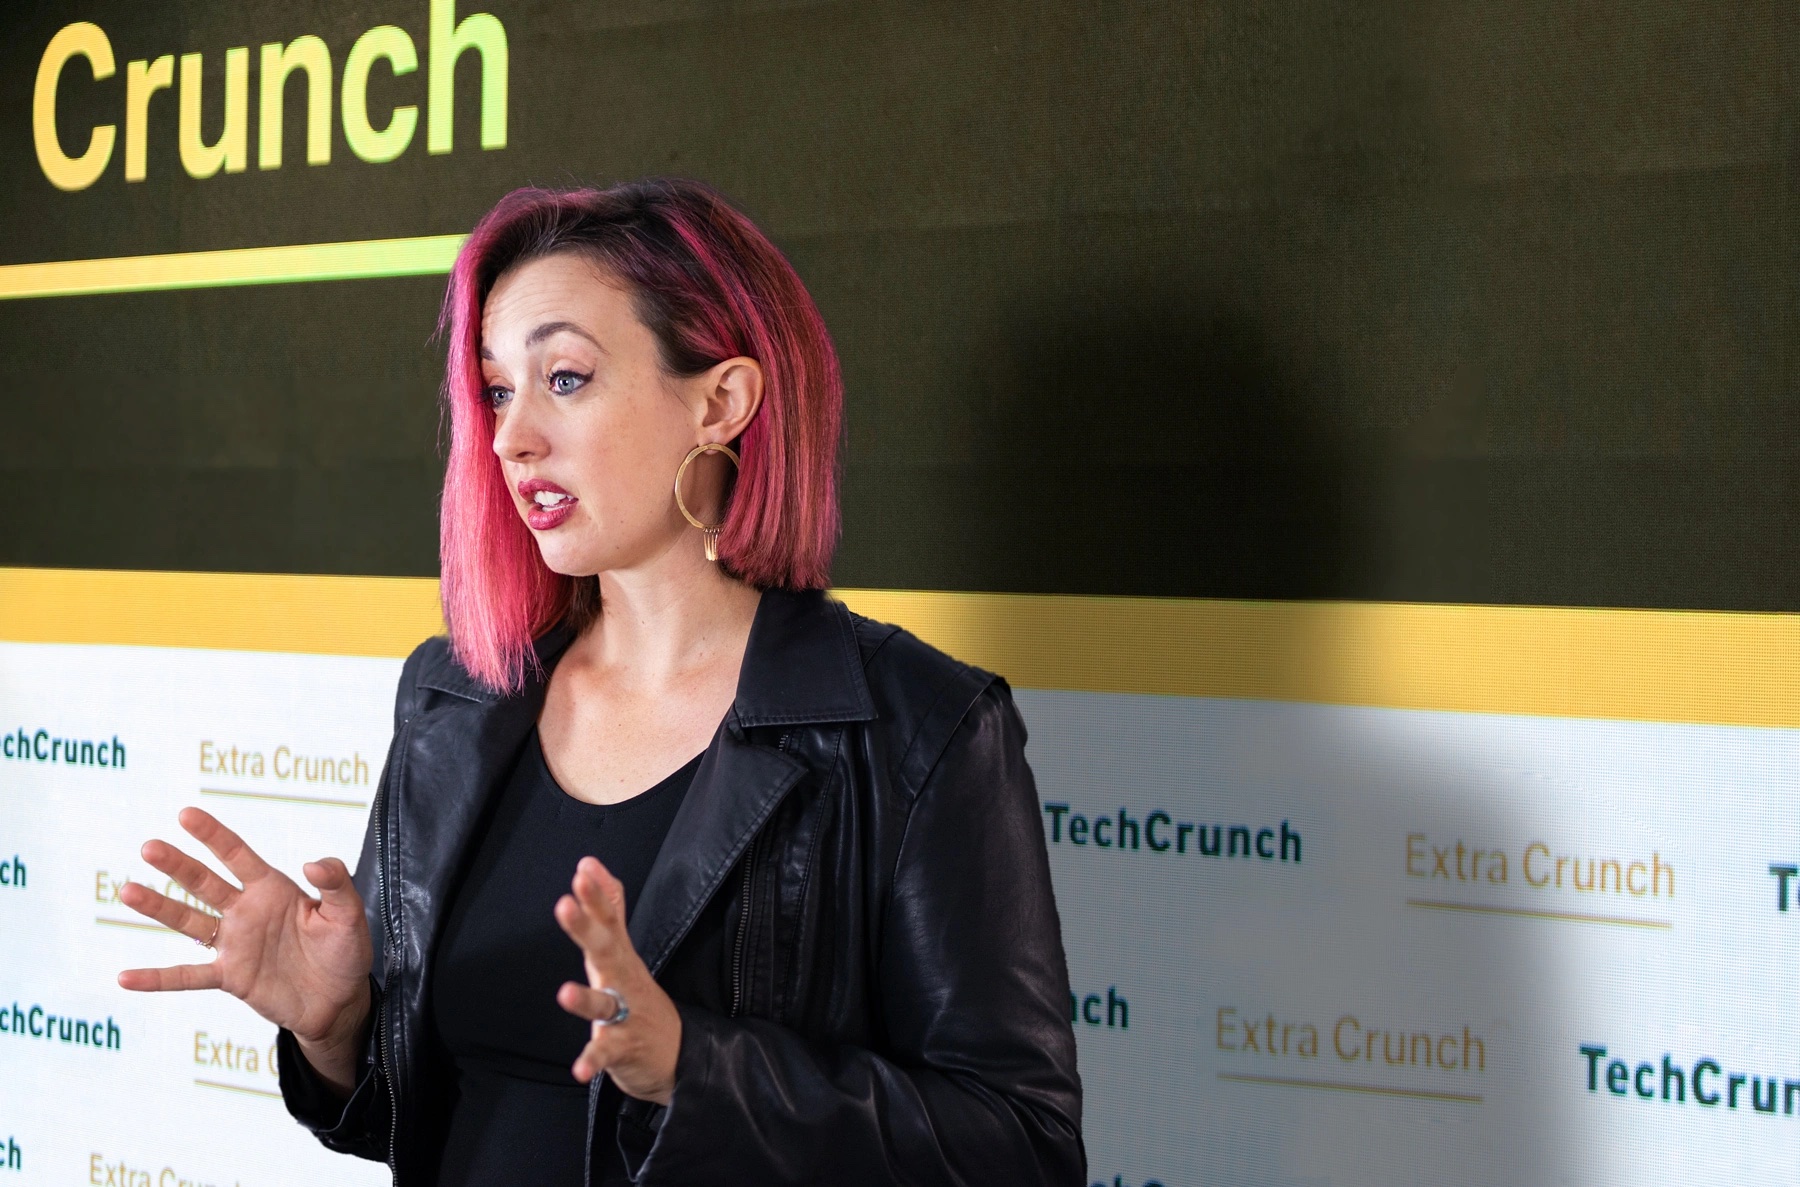 A composite image of immigration law attorney Sophie Alcorn in front of a background with the TechCrunch logo.